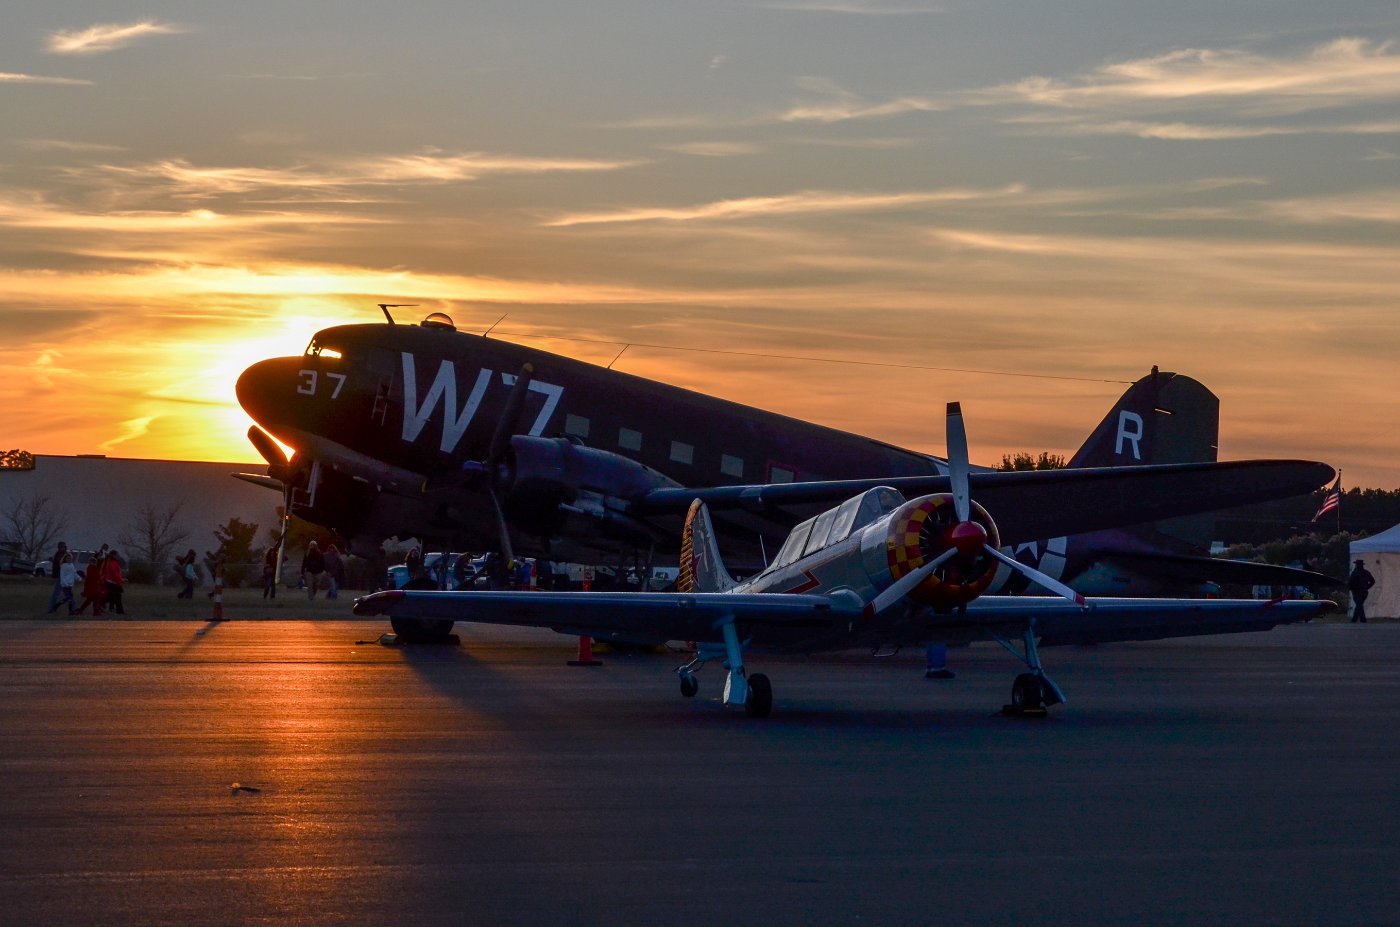 Sunset at Warbirds Over Monroe 2017. Thanks to my friend Dave Gorman for telling me to turn around and stop taking pictures of the Mosquito!